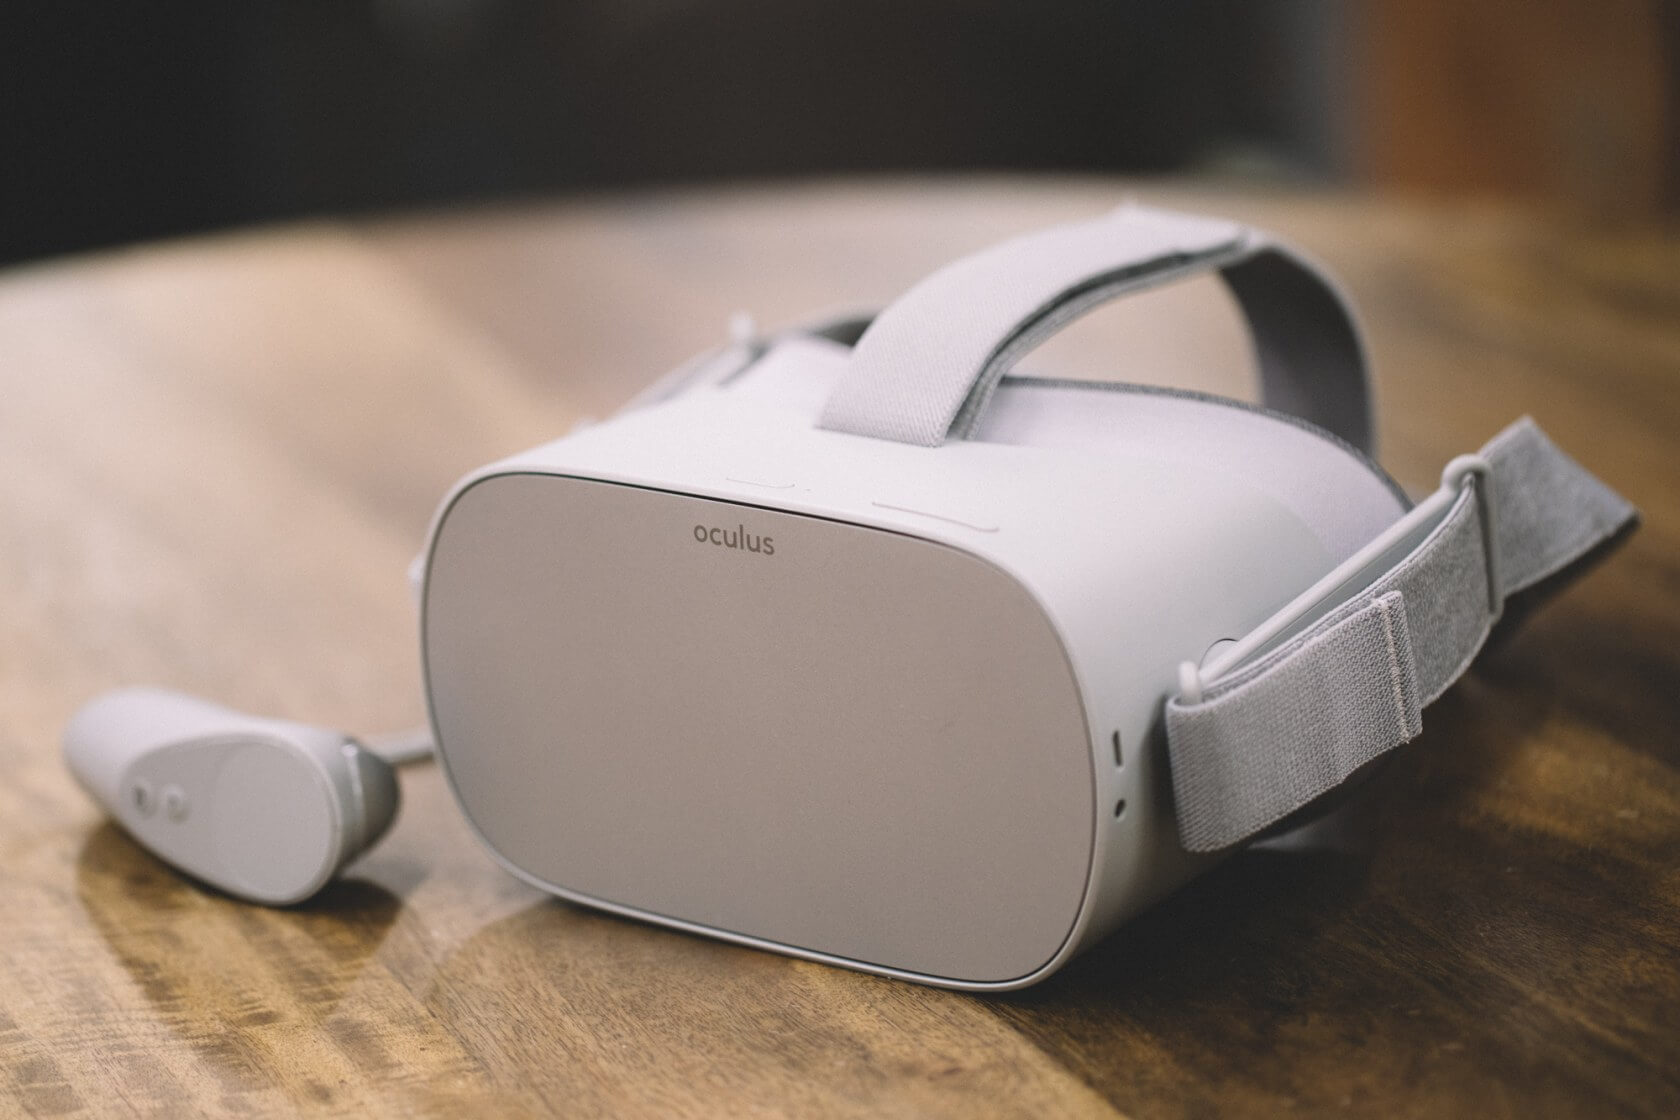 The Oculus Go's price has been slashed to $150